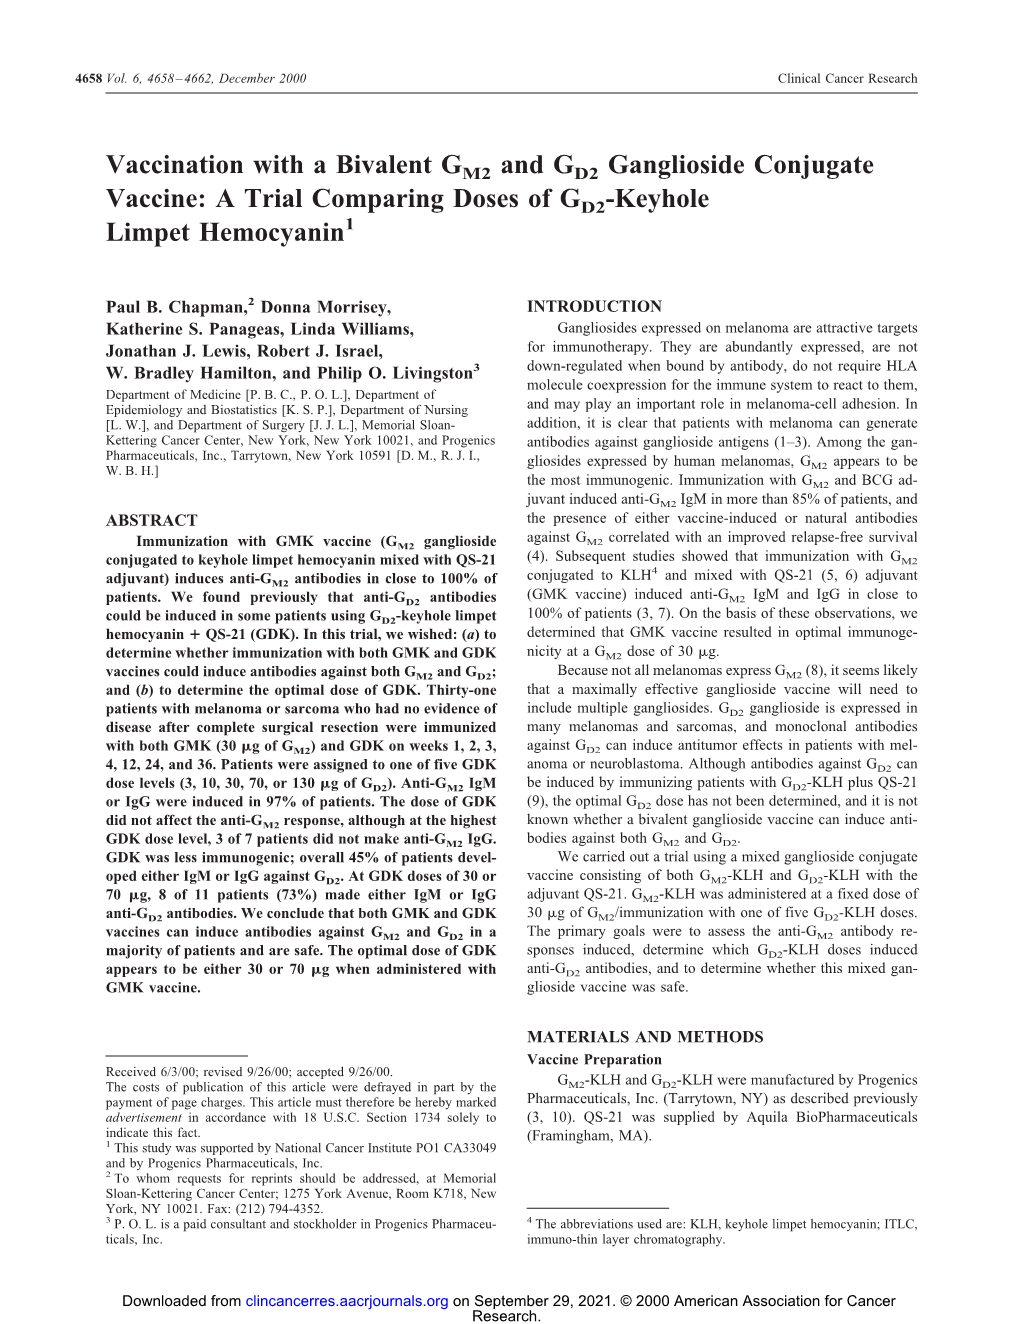 Vaccination with a Bivalent GM2 and GD2 Ganglioside Conjugate Vaccine: a Trial Comparing Doses of GD2-Keyhole Limpet Hemocyanin1